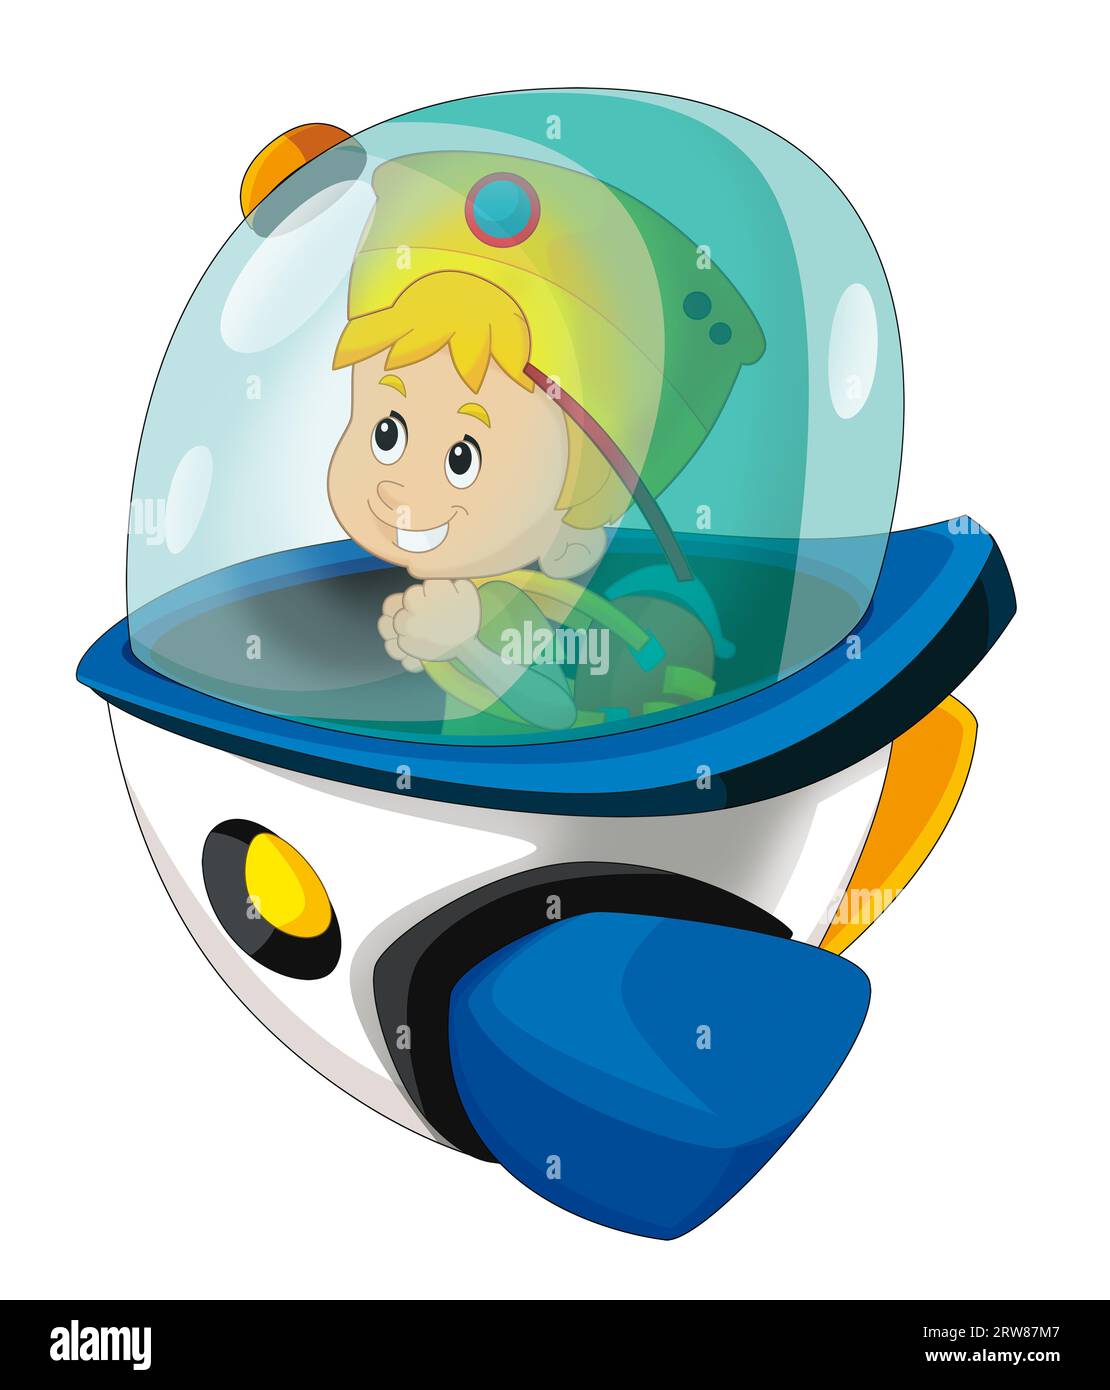 Cartoon kid on a toy funfair space ship or star ship amusement park or playground isolated illustration for kids Stock Photo